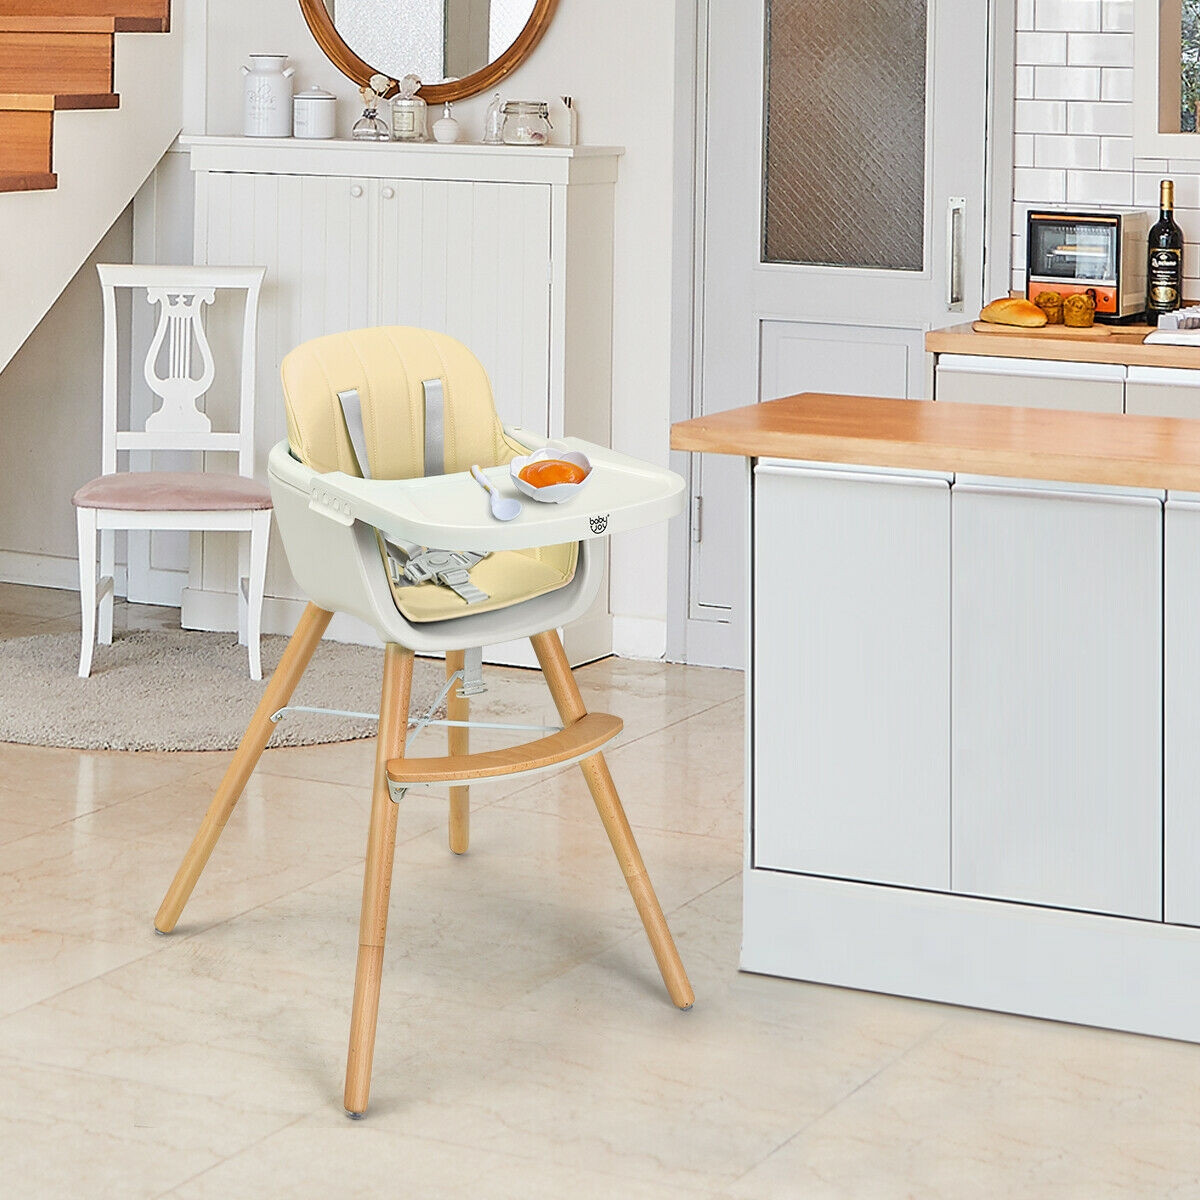 Wooden Baby 3 In 1 Convertible High Chair W / Cushion